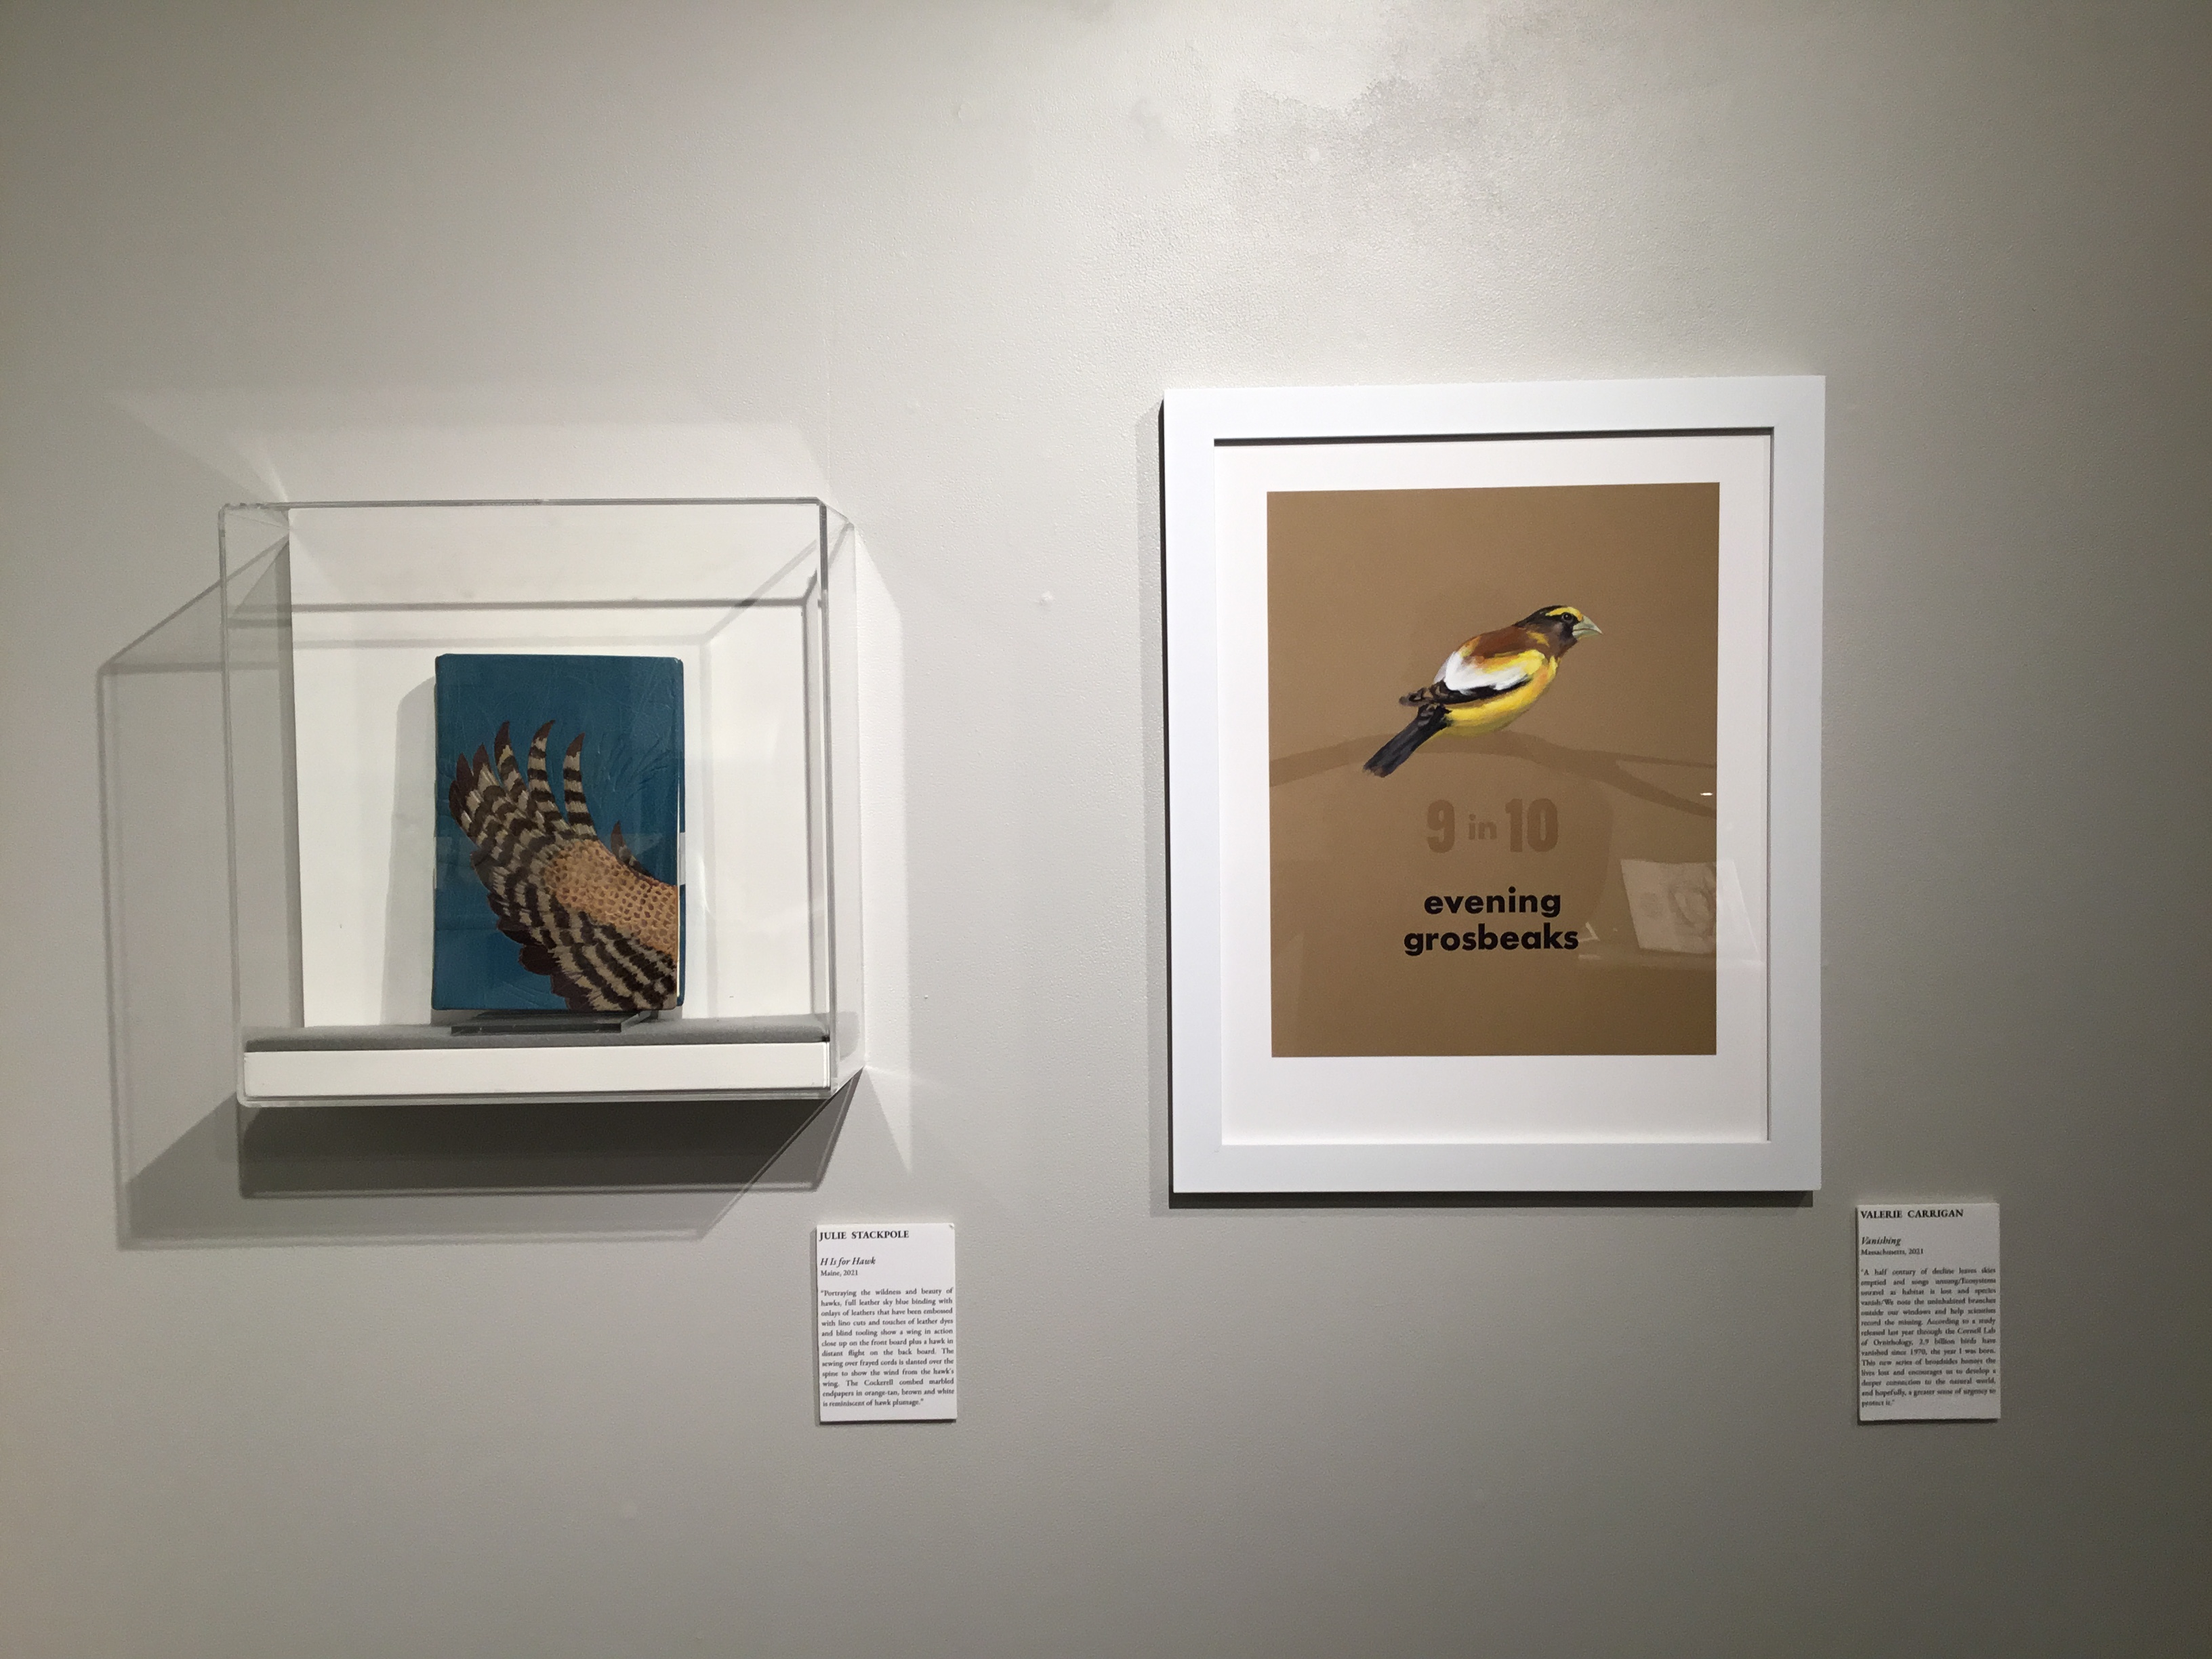 A partial wall on the south side of the large gallery features a wall mounted case with a teal leather book cover of a hawk's wing next to a framed letterpress printed and hand painted image of an evening grosbeak on kraft colored paper.